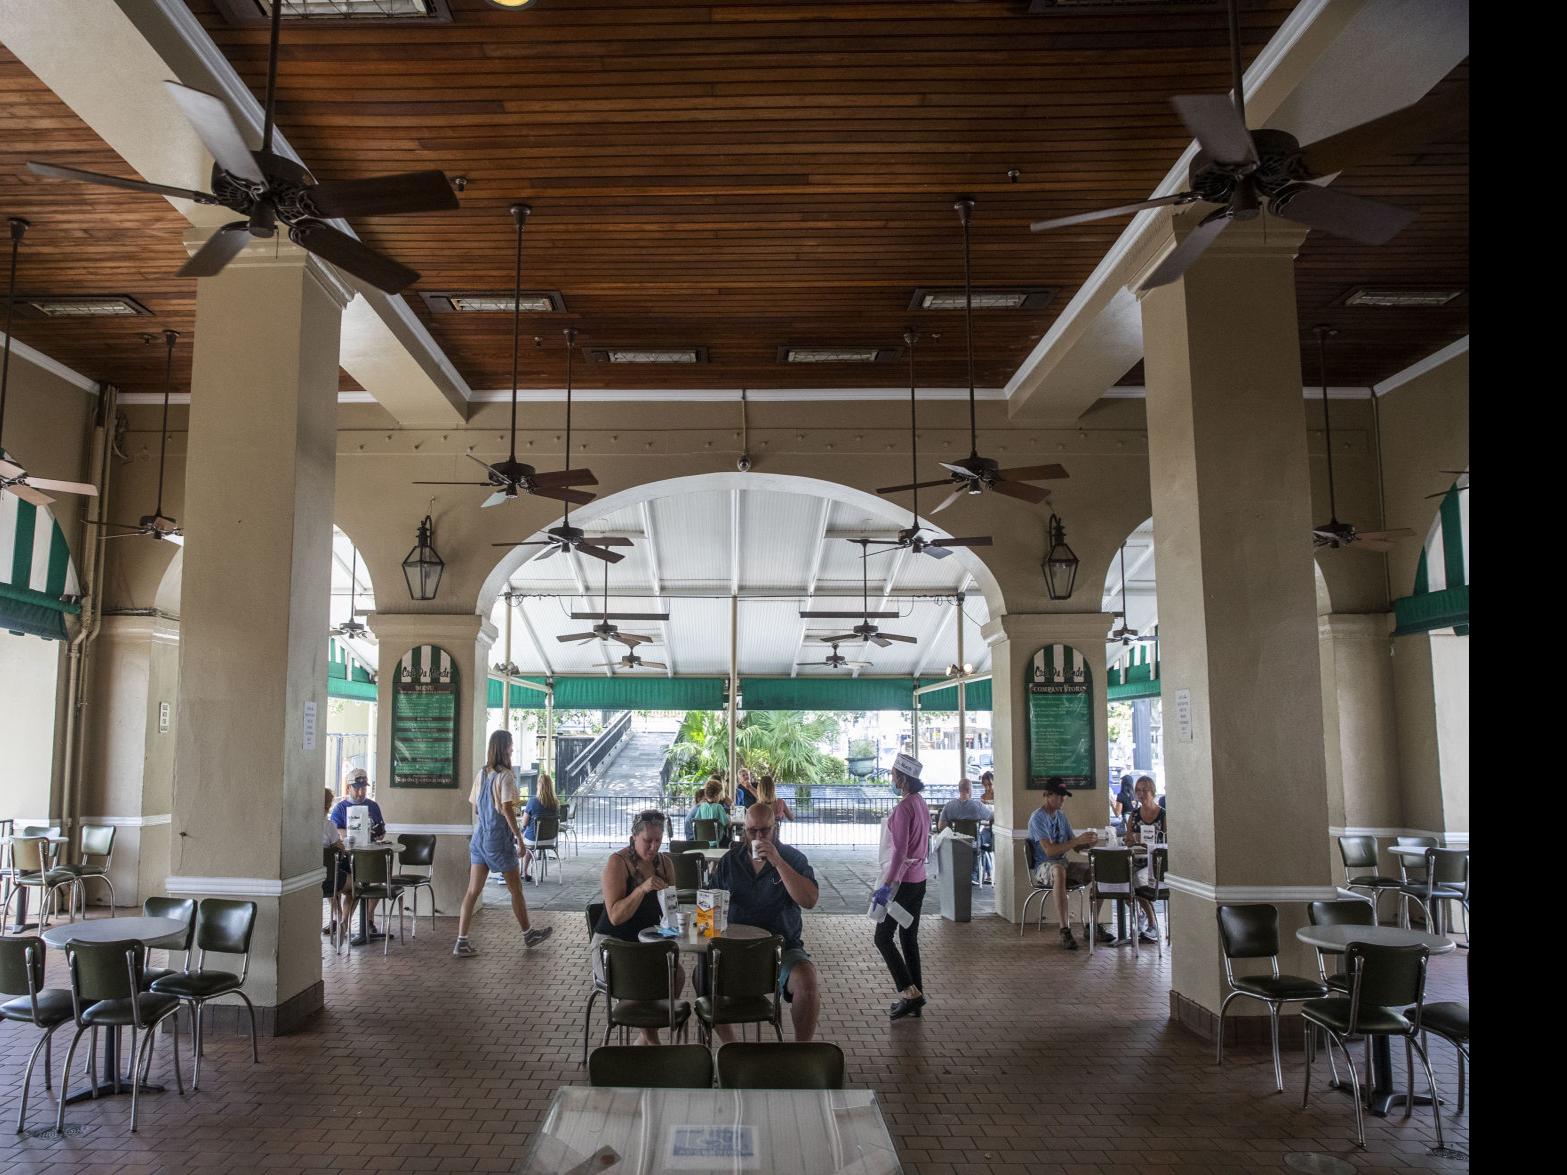 Cafe du Monde reopens in the French Quarter hoping to show 'New